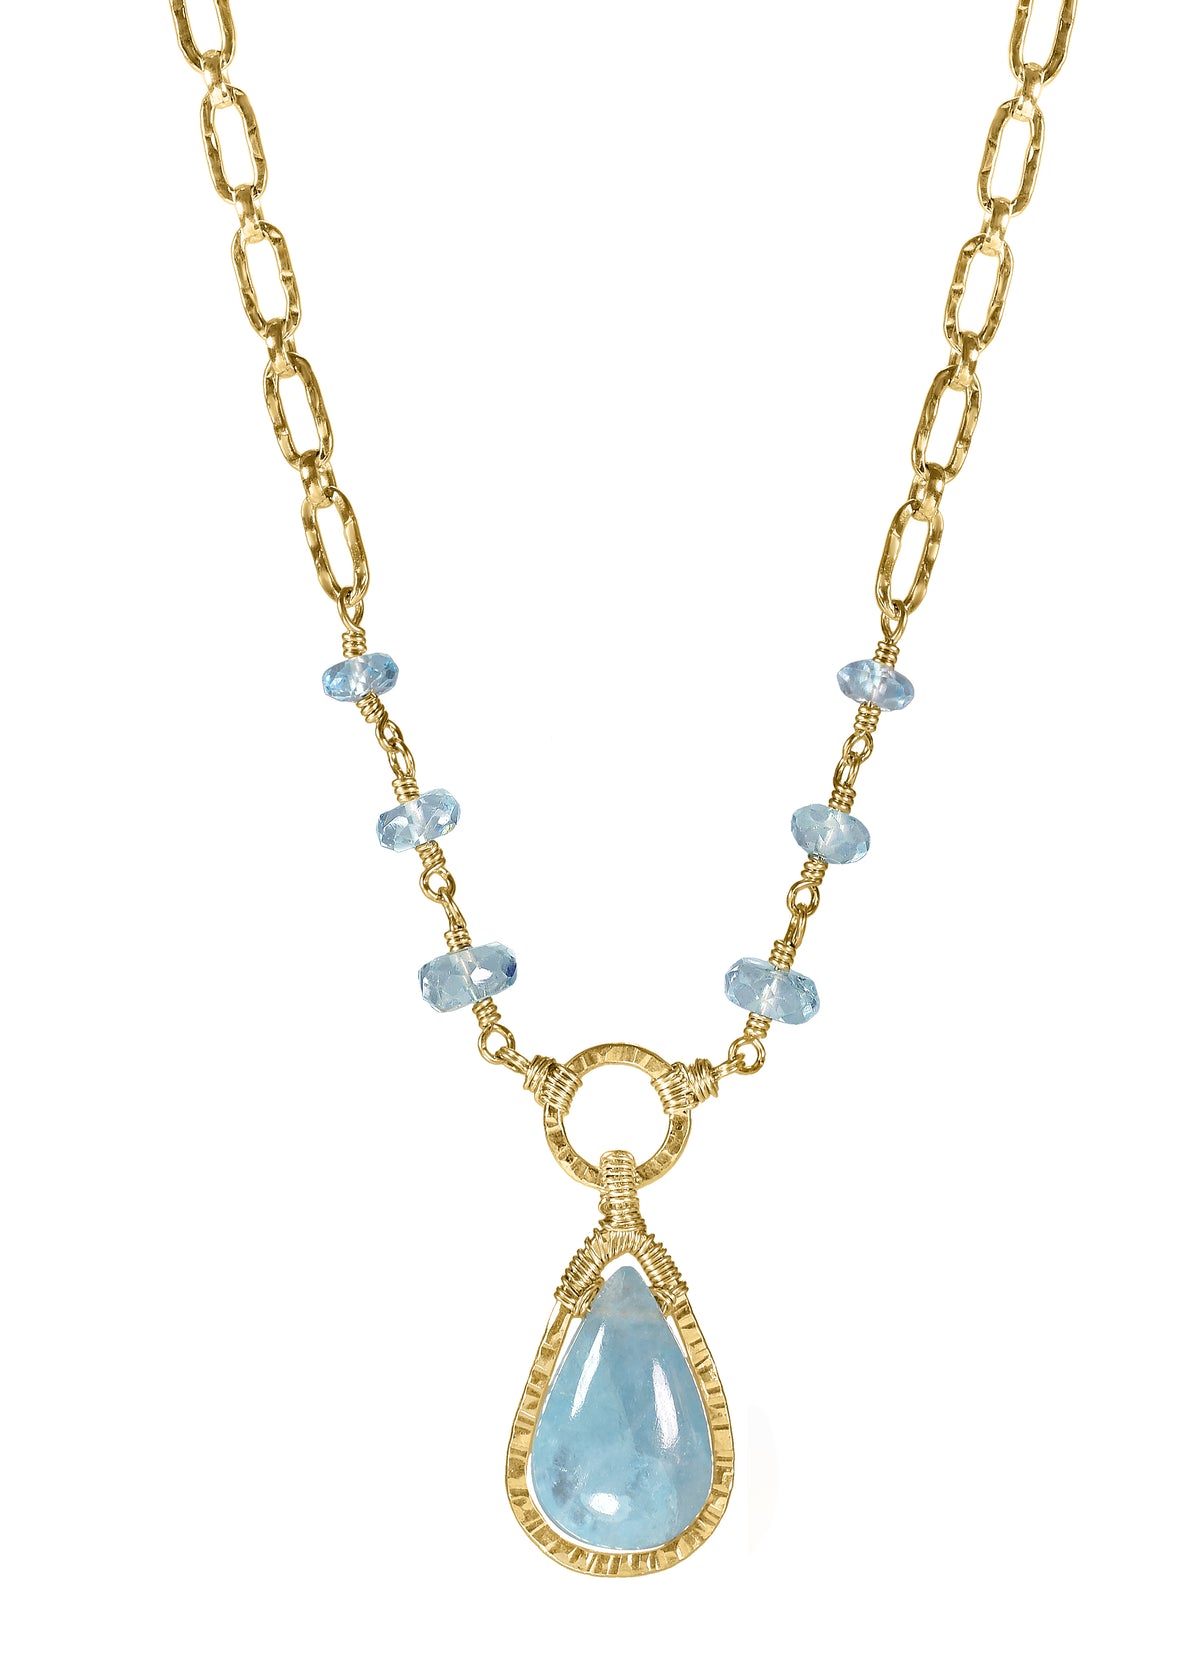 Aquamarine 14k gold fill Necklace measures 17-3/4&quot; in length Pendant measures 3/4&quot; in length and 3/8&quot; in width at the widest point Handmade in our Los Angeles studio